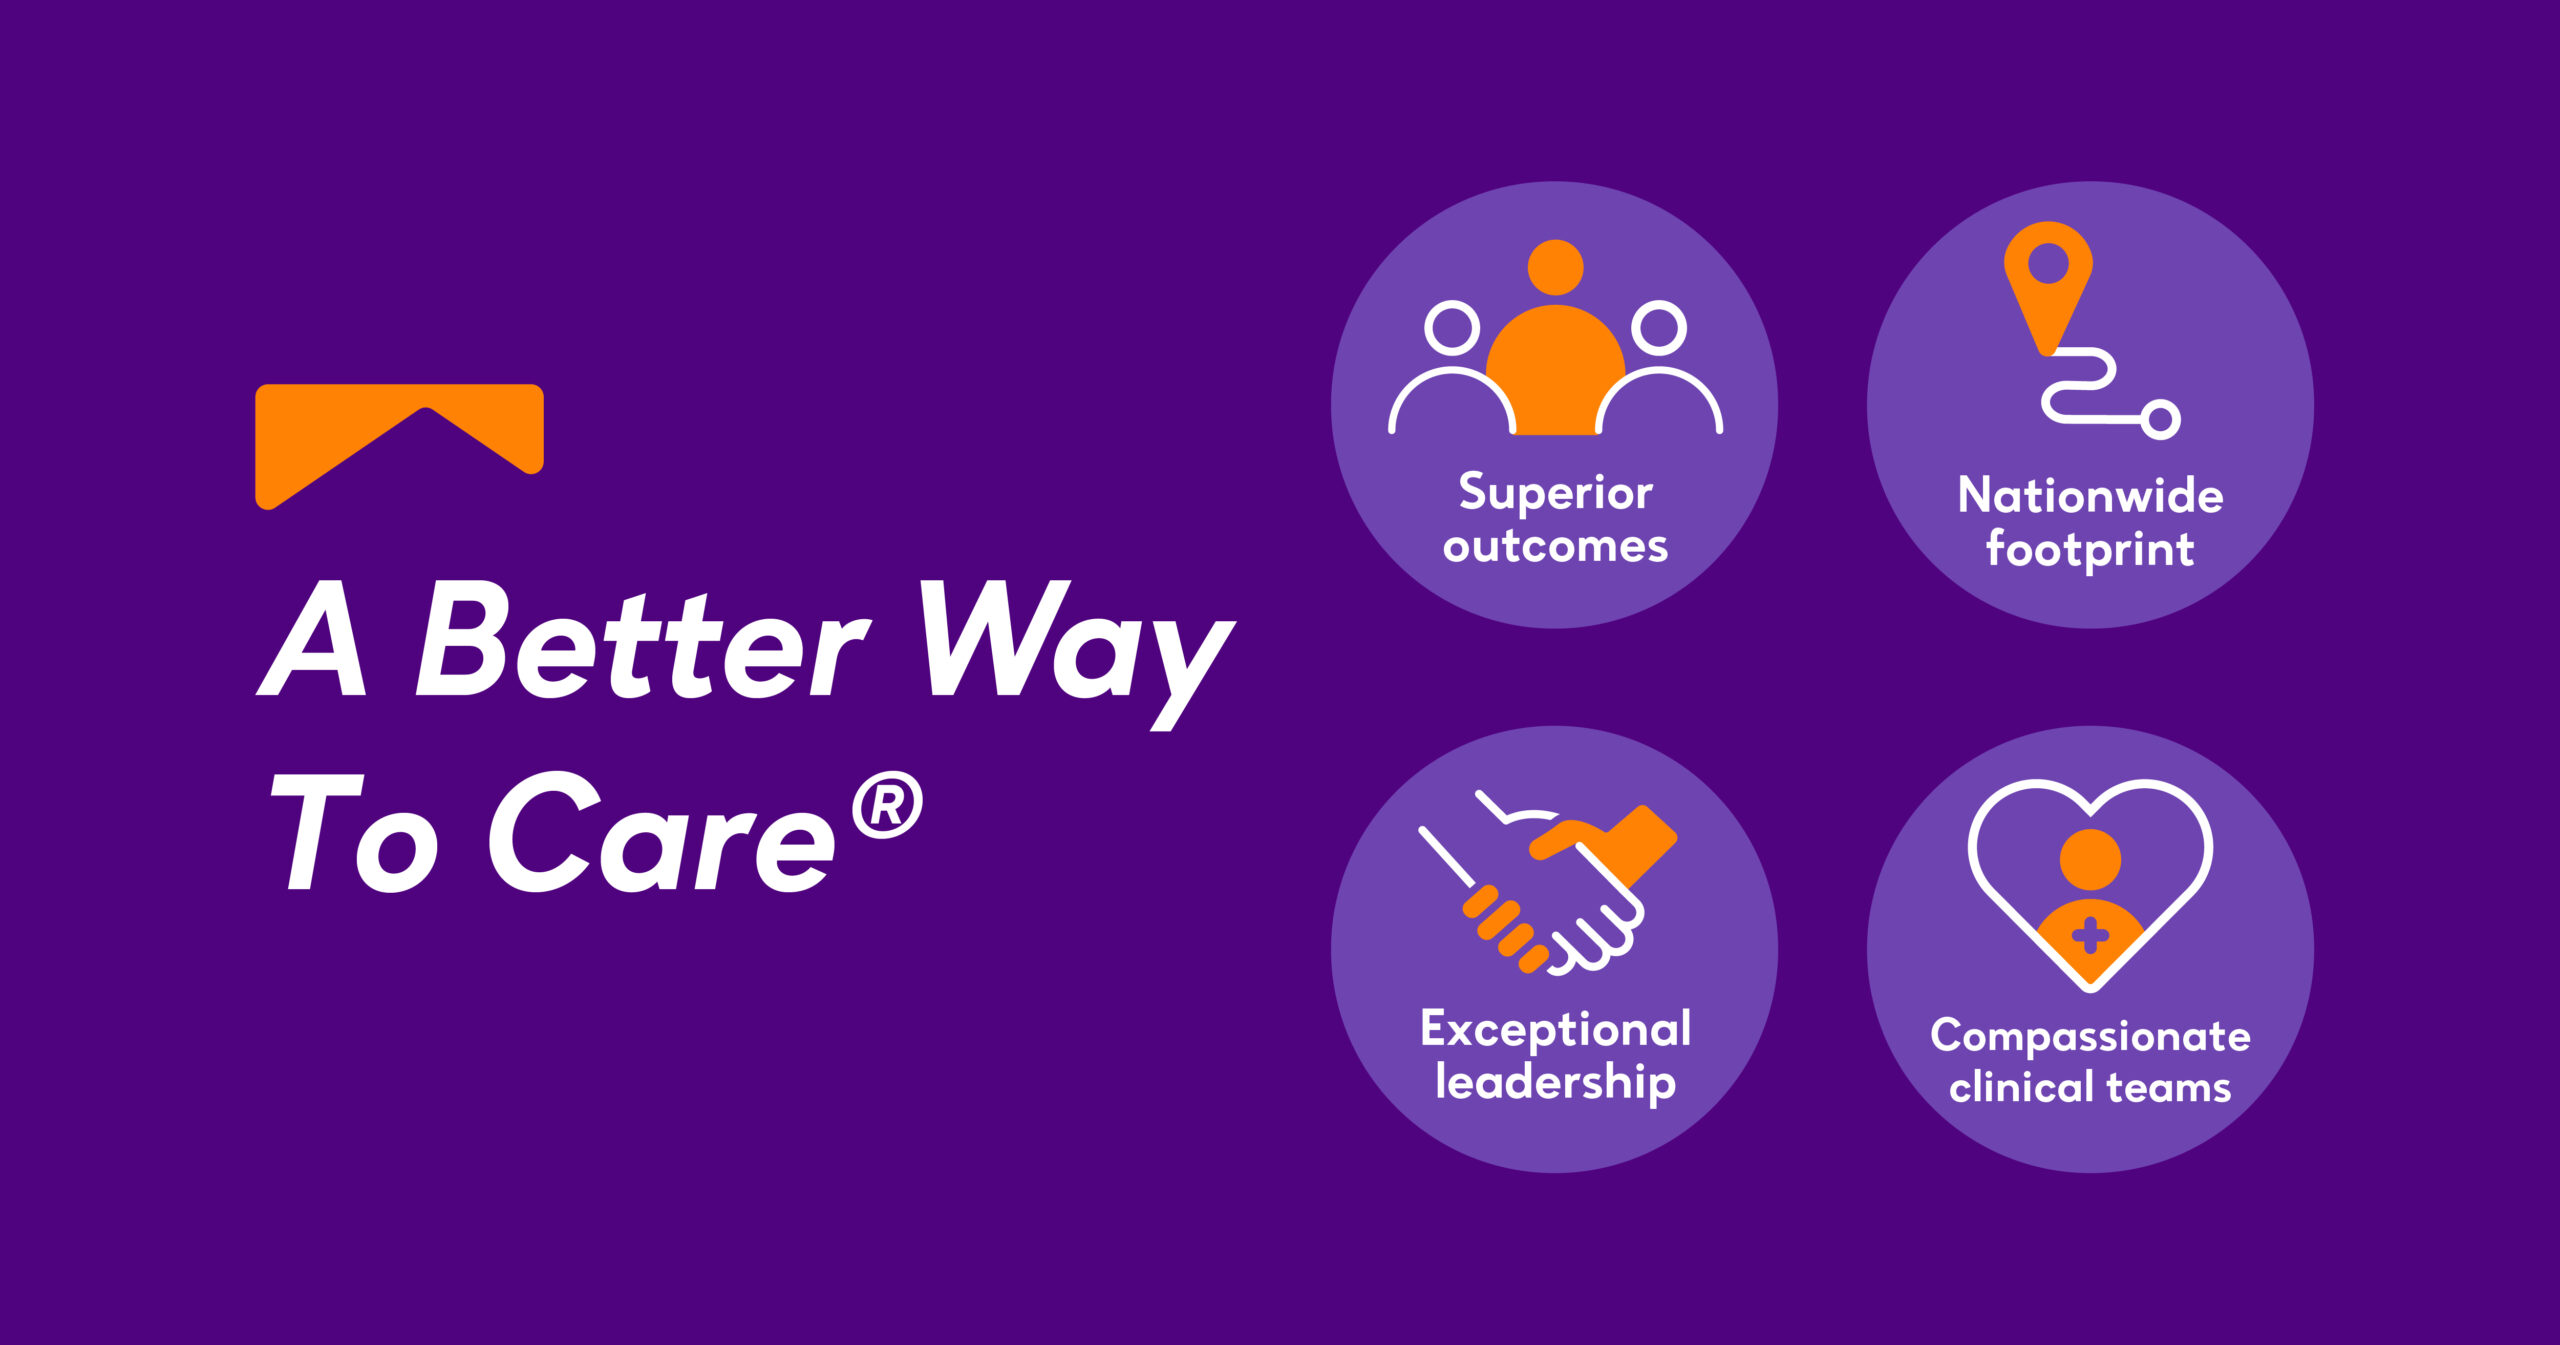 The why behind A Better Way to Care®